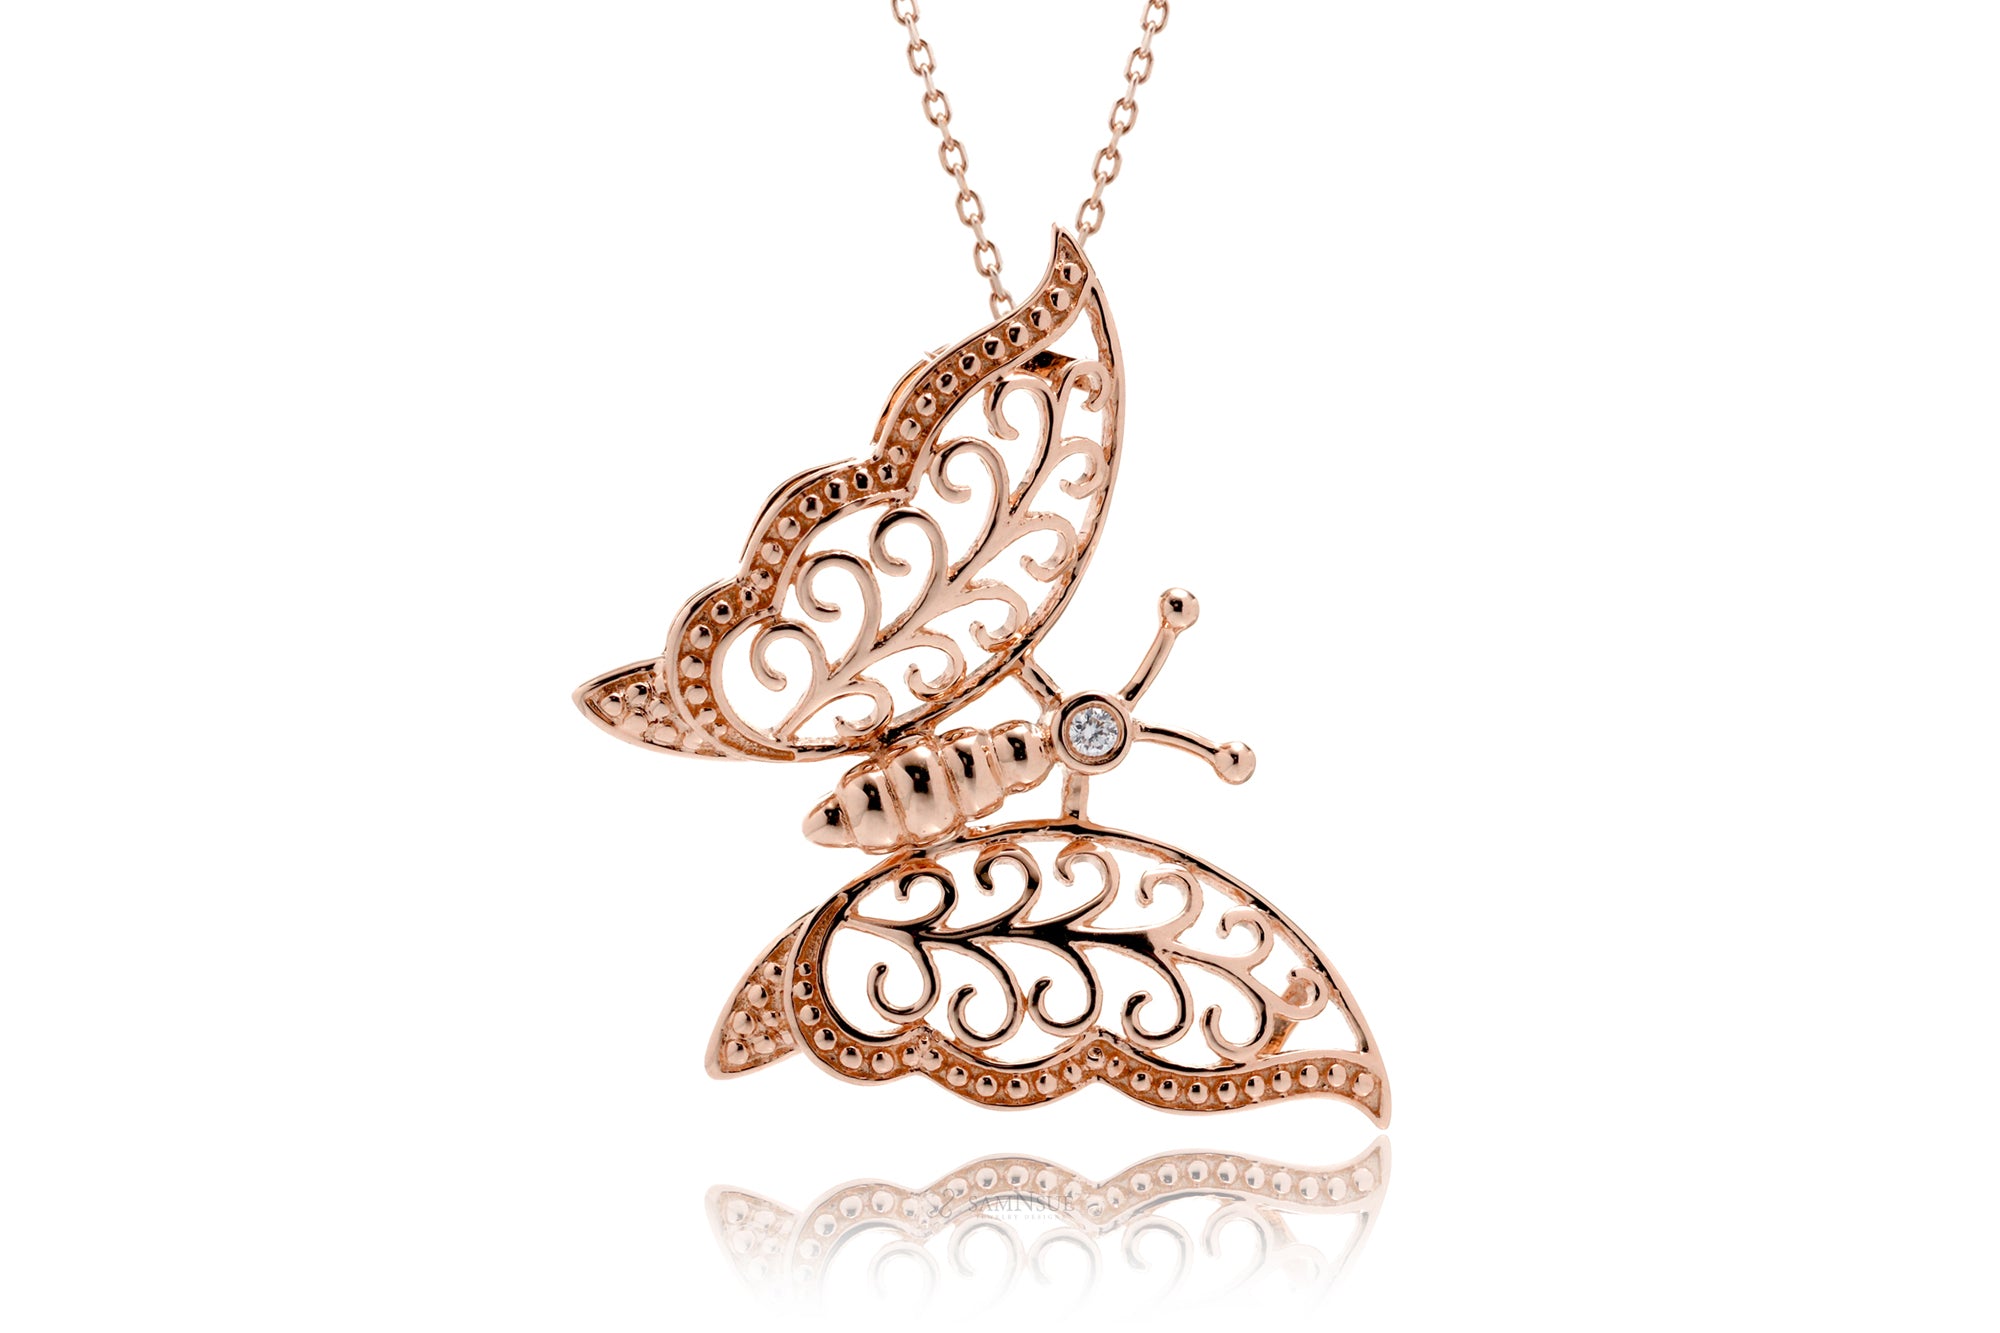 The Monarch Butterfly Pendant